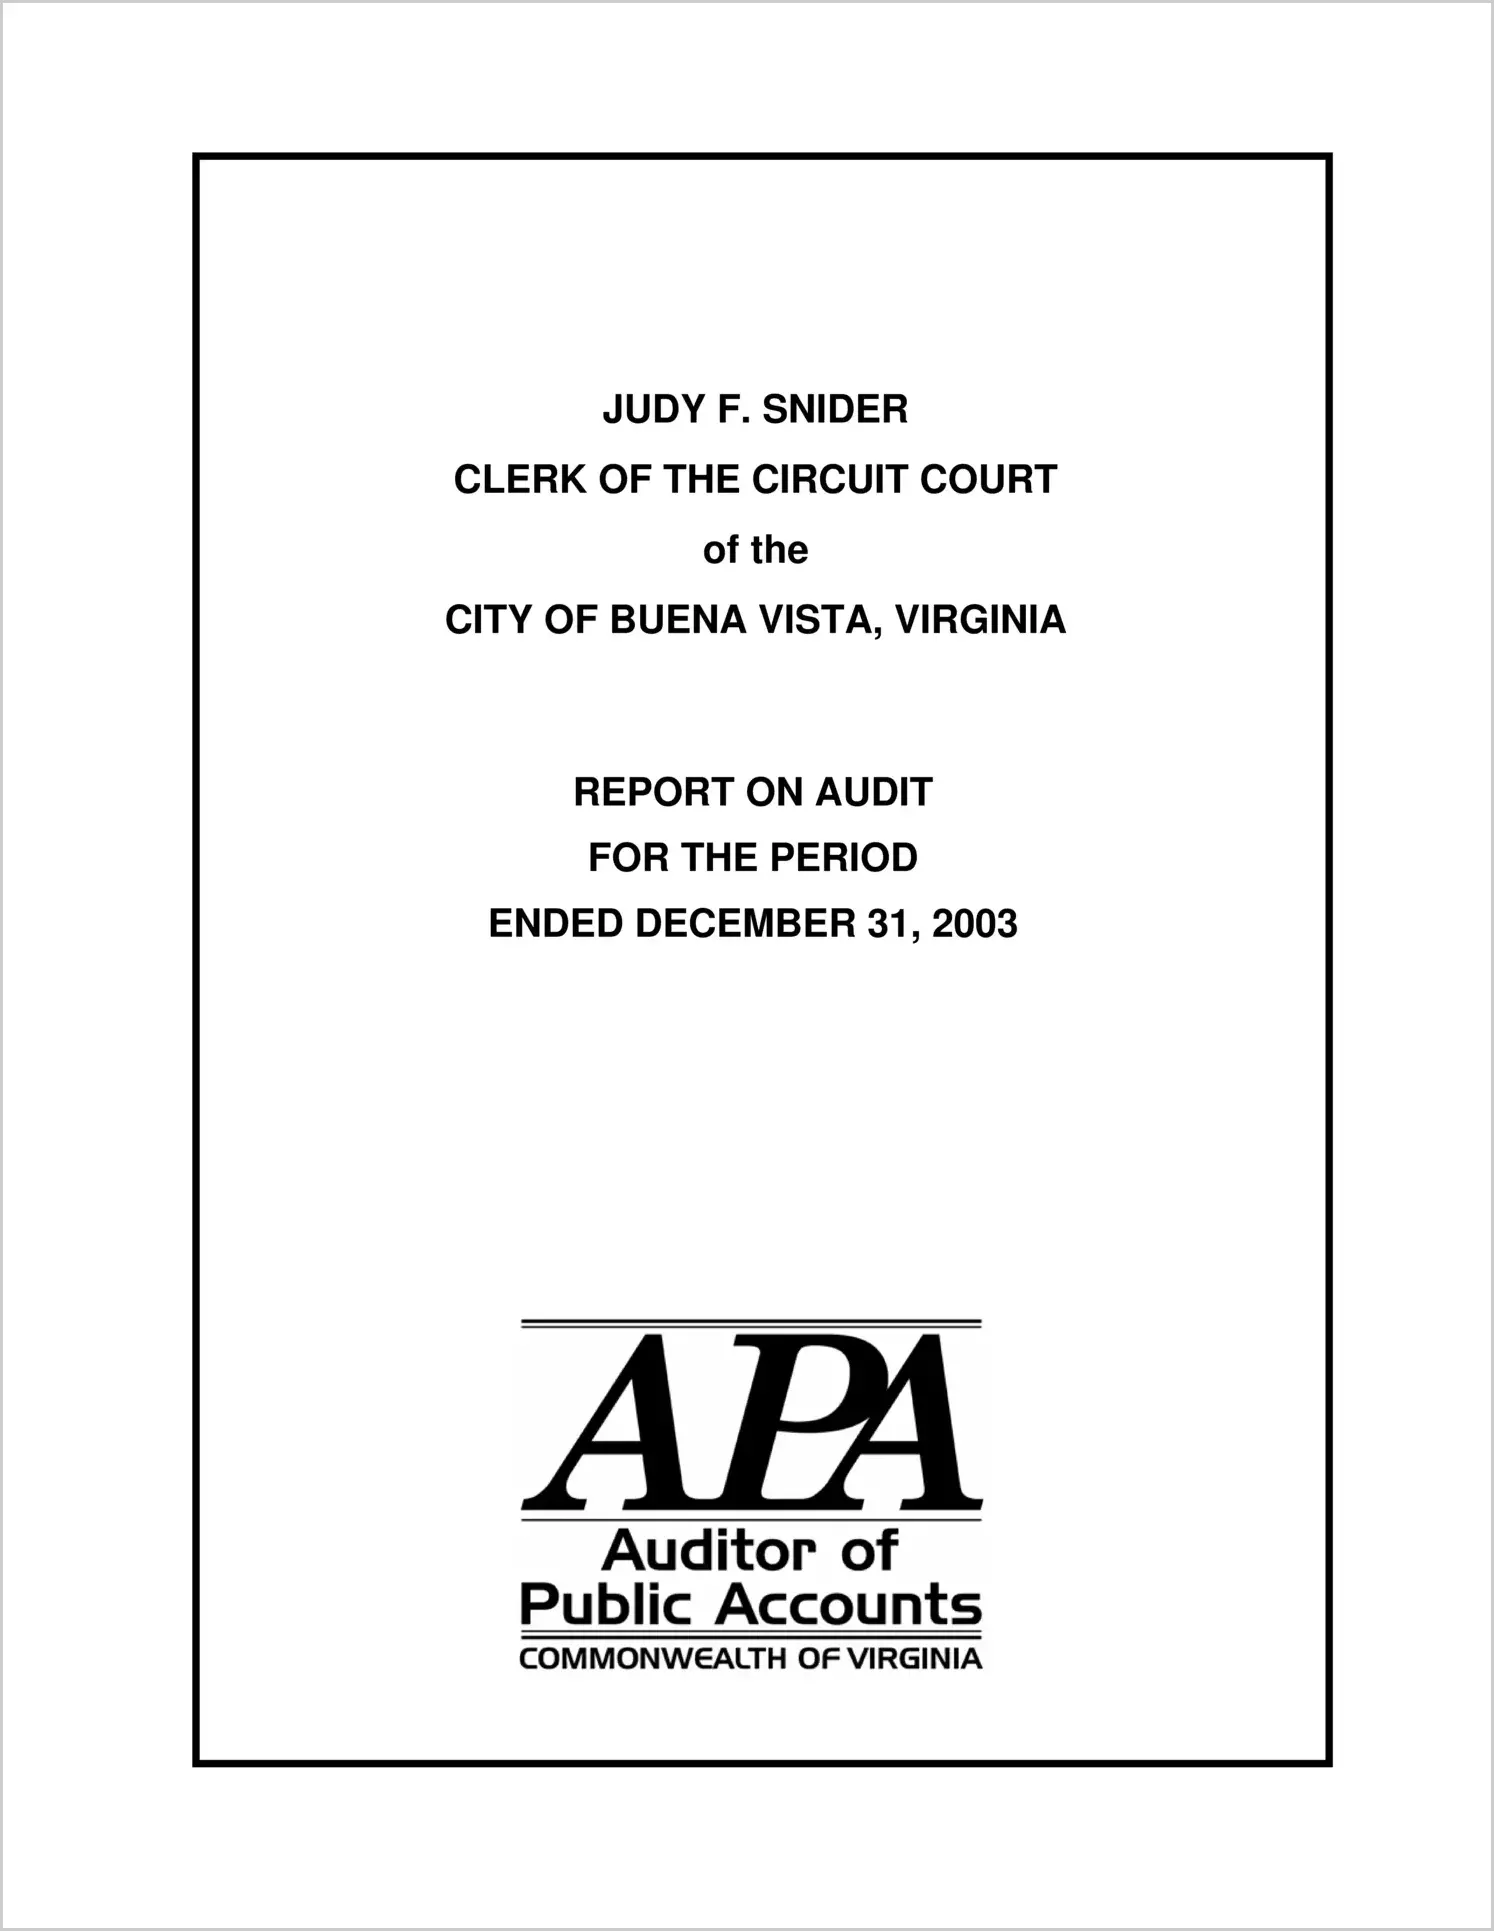 Clerk of the Circuit Court for the City of Buena Vista for the period ended December 31, 2003